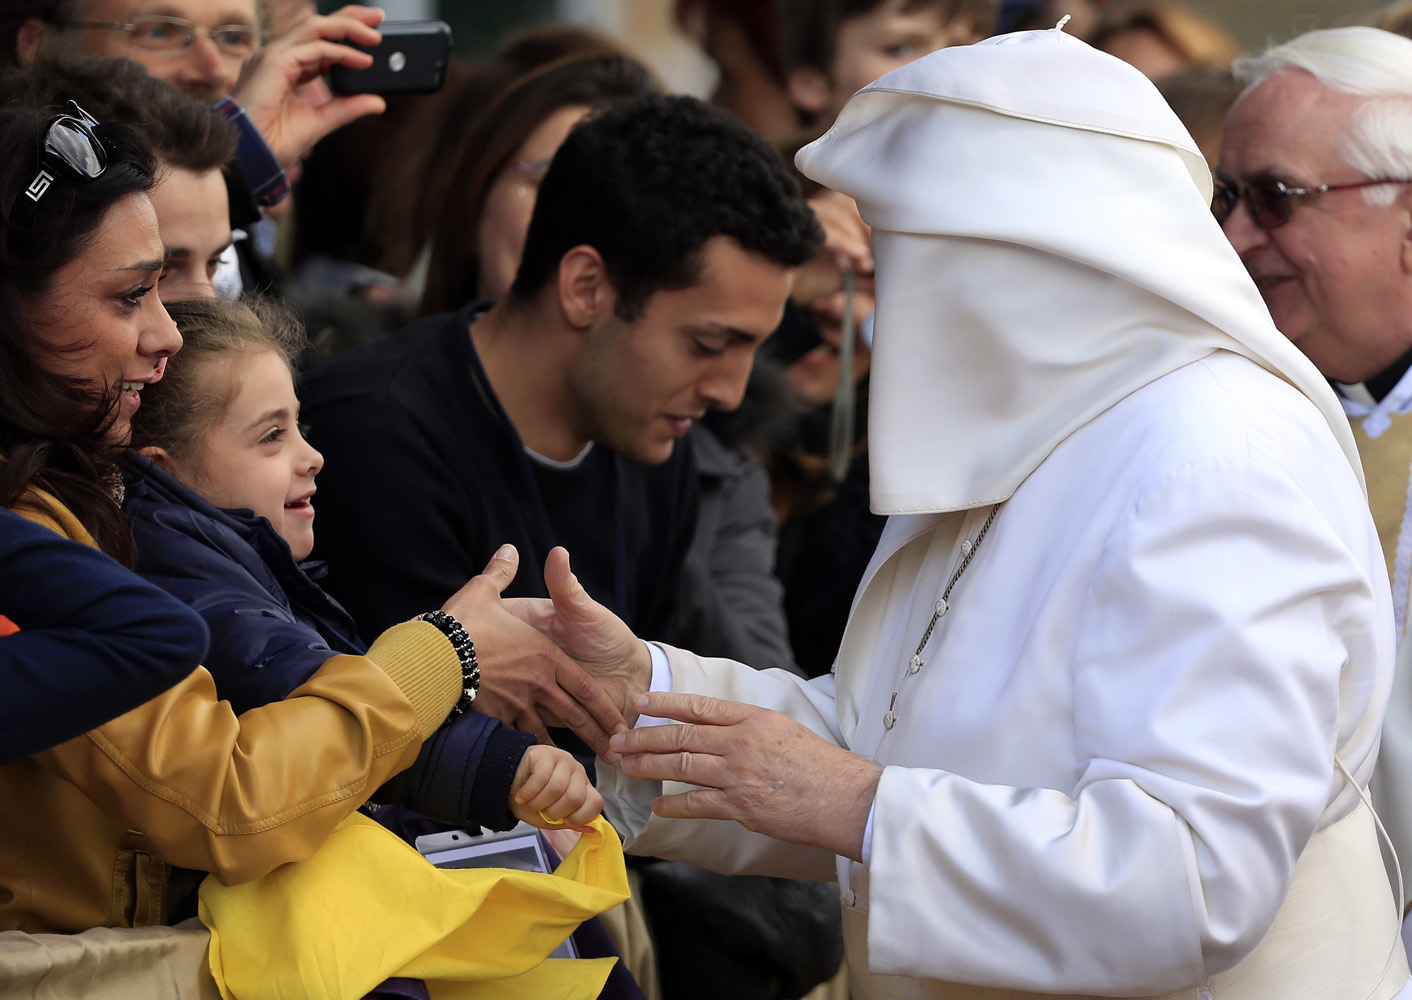 A gust of wind blows Pope Francis's mantle as he greets the faithful at the S. Maria della Provvidenza church in Rome, during the Holy Thursday celebration, April 17, 2014.